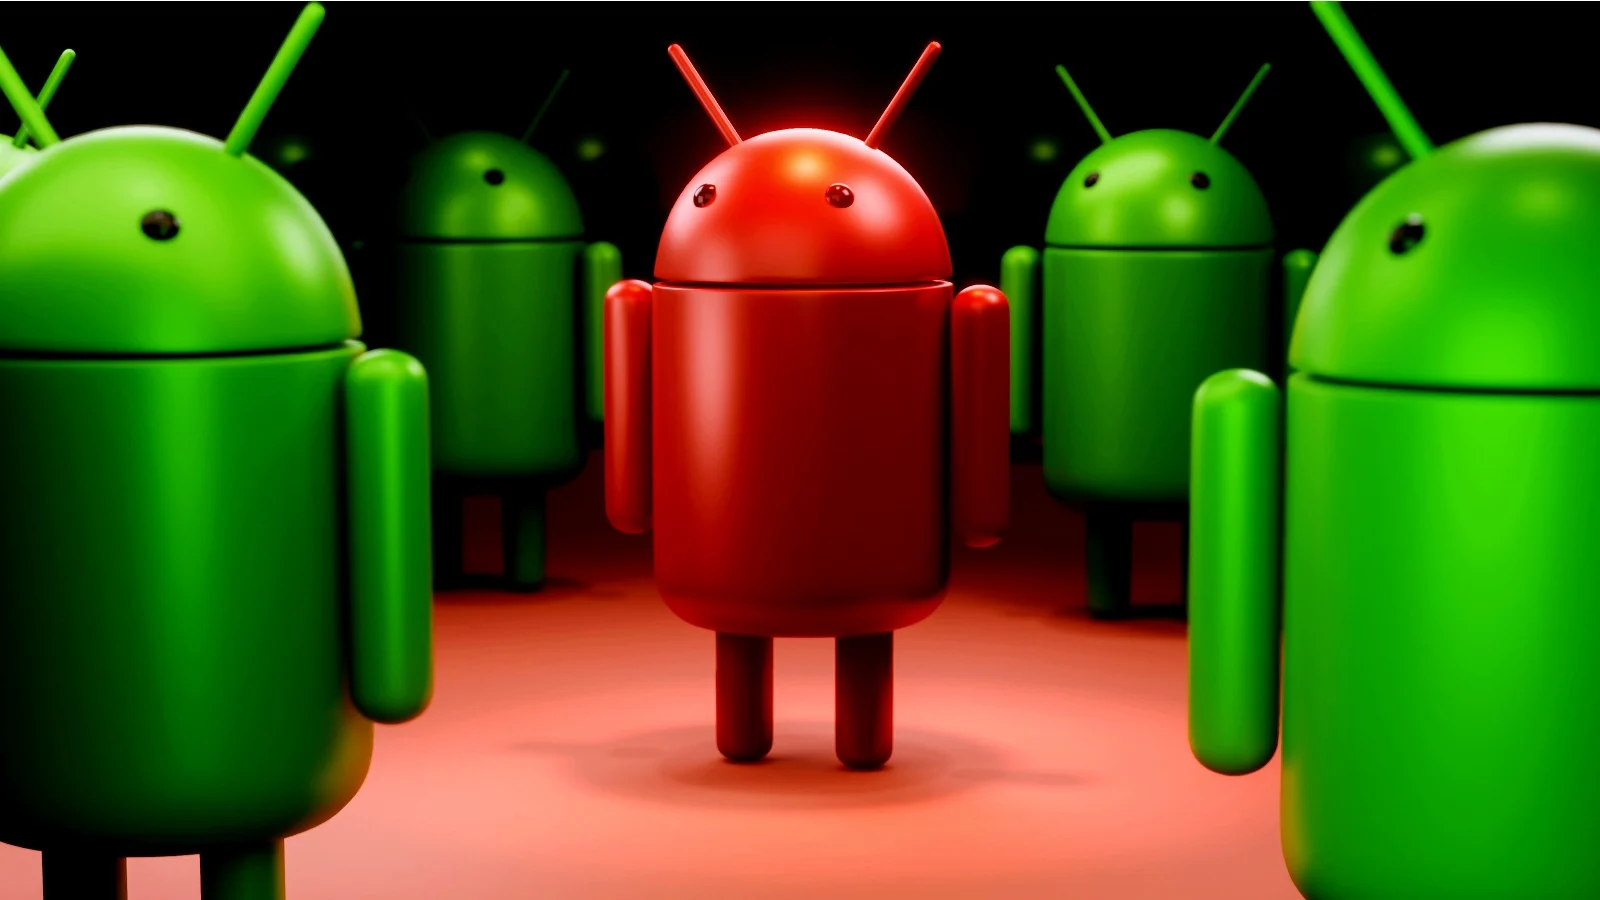 Two million Android malware applications